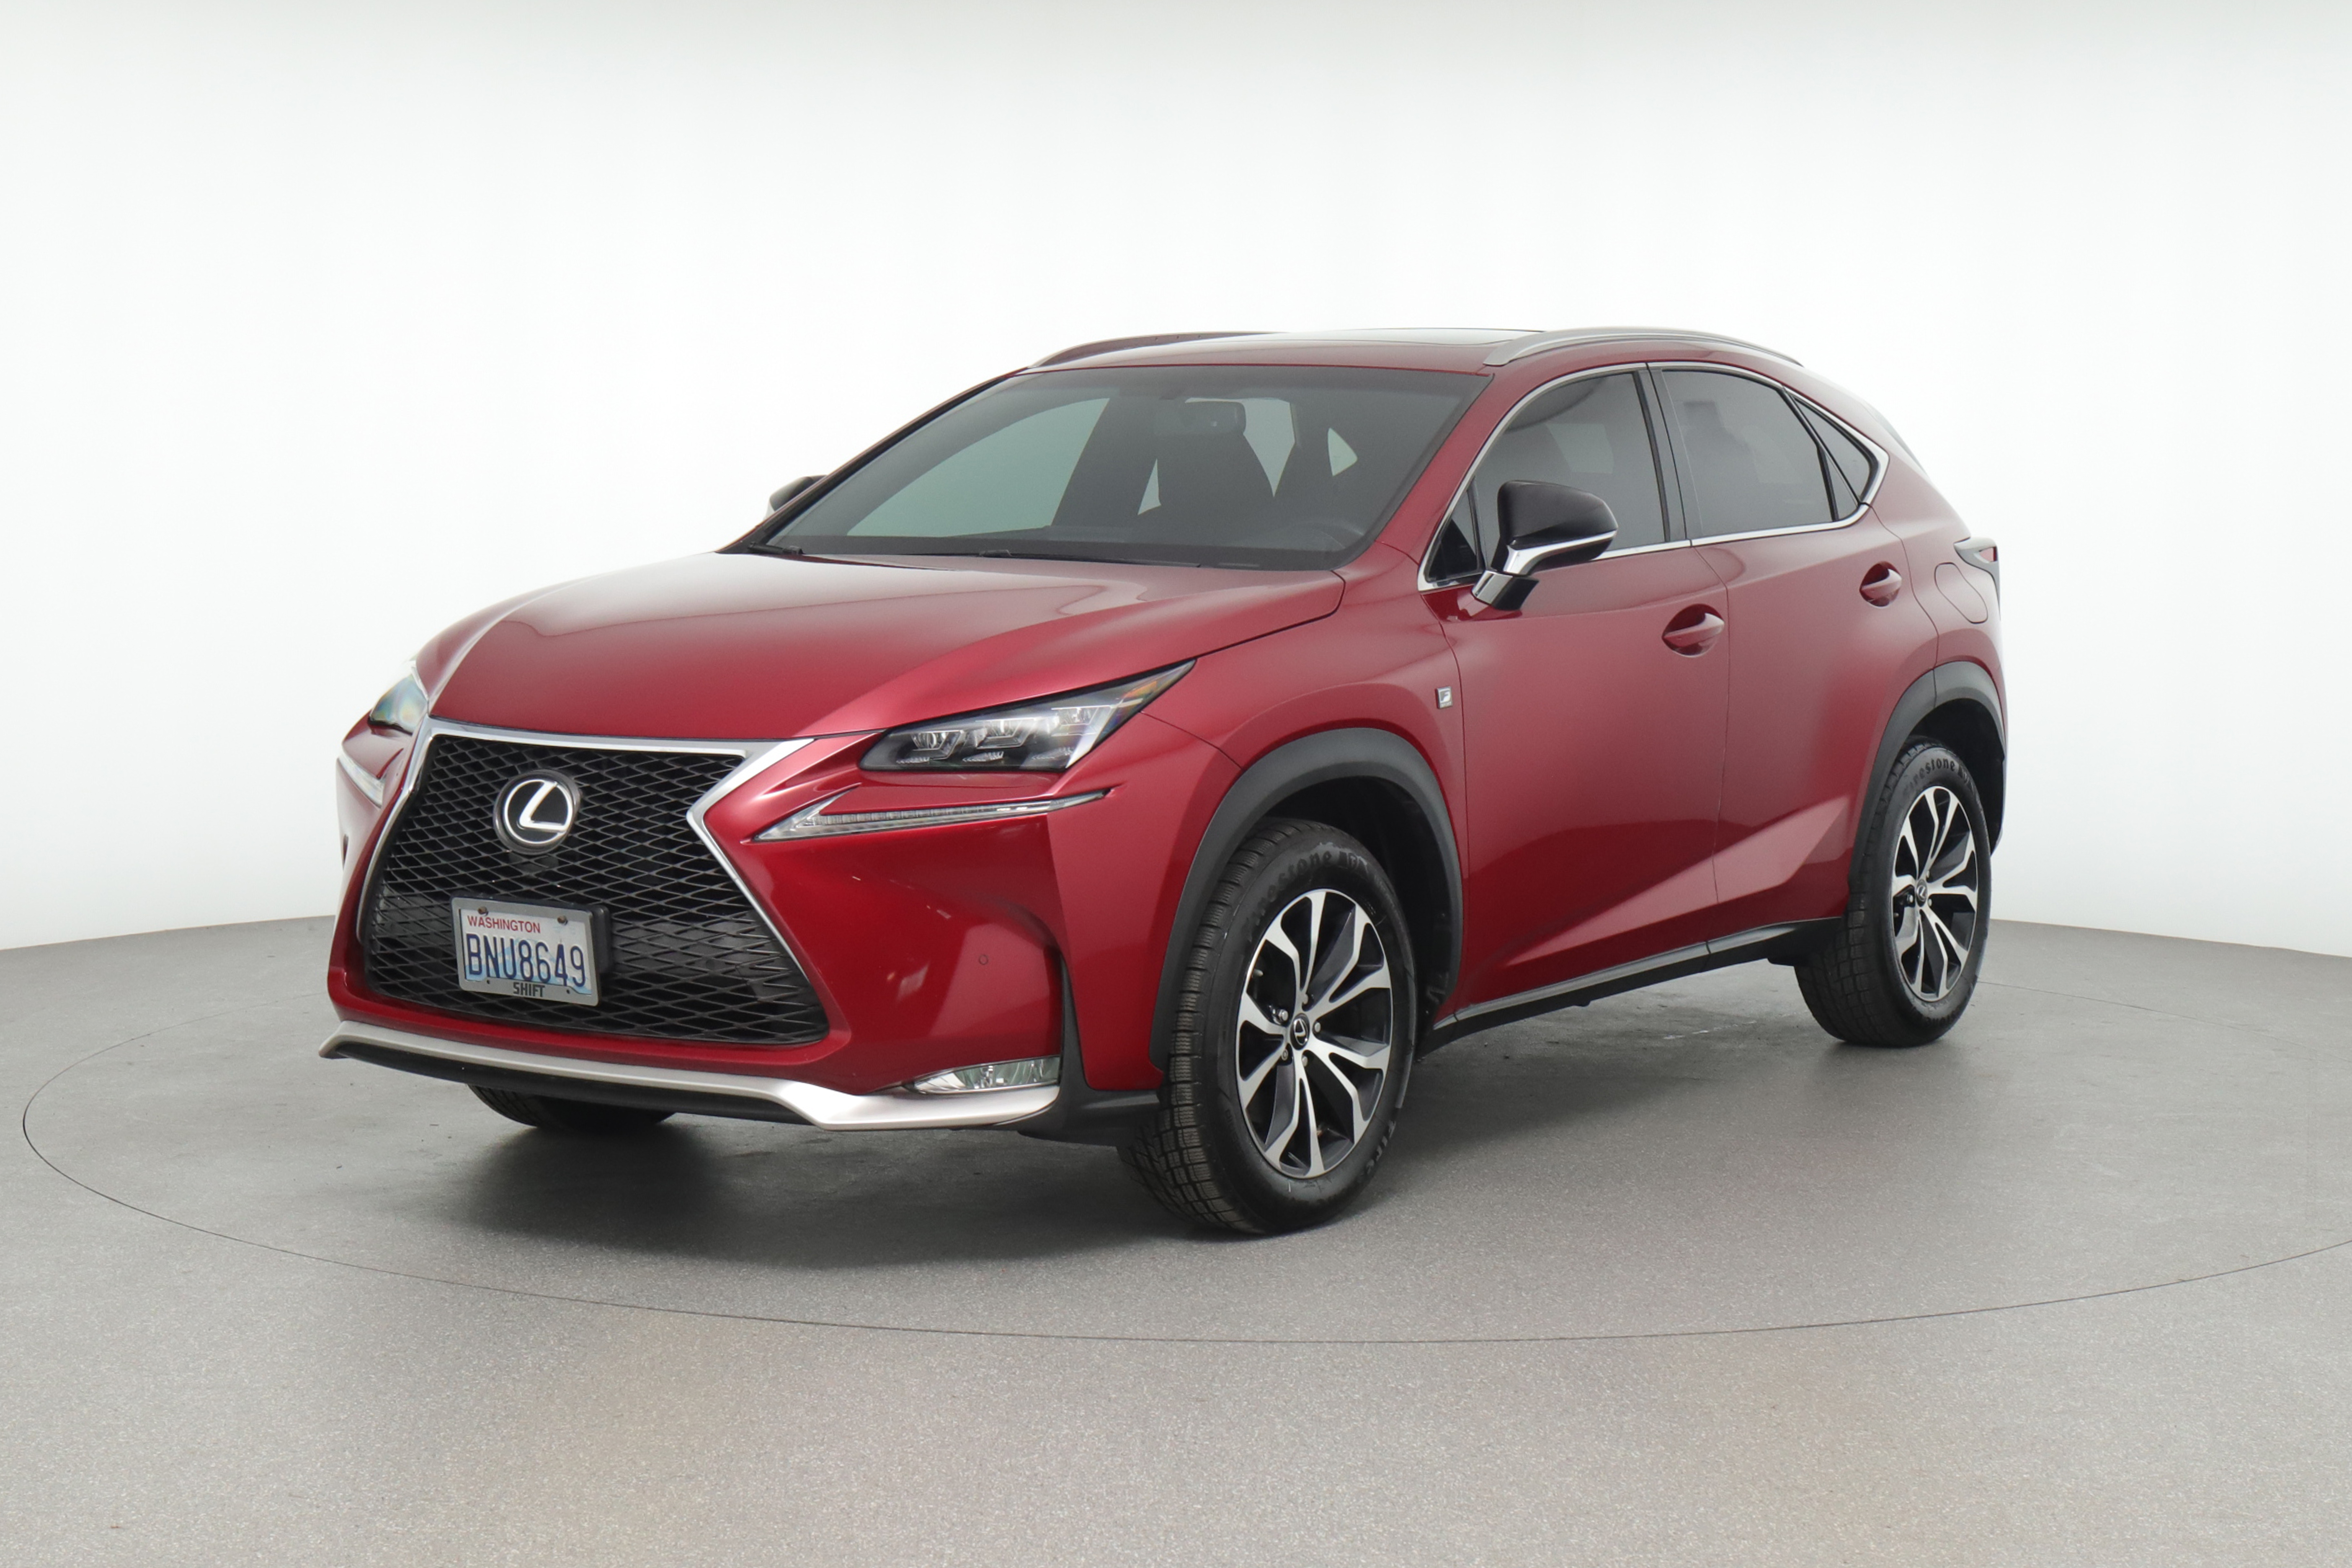 Used 2016 Red Lexus NX 200t for $29,950